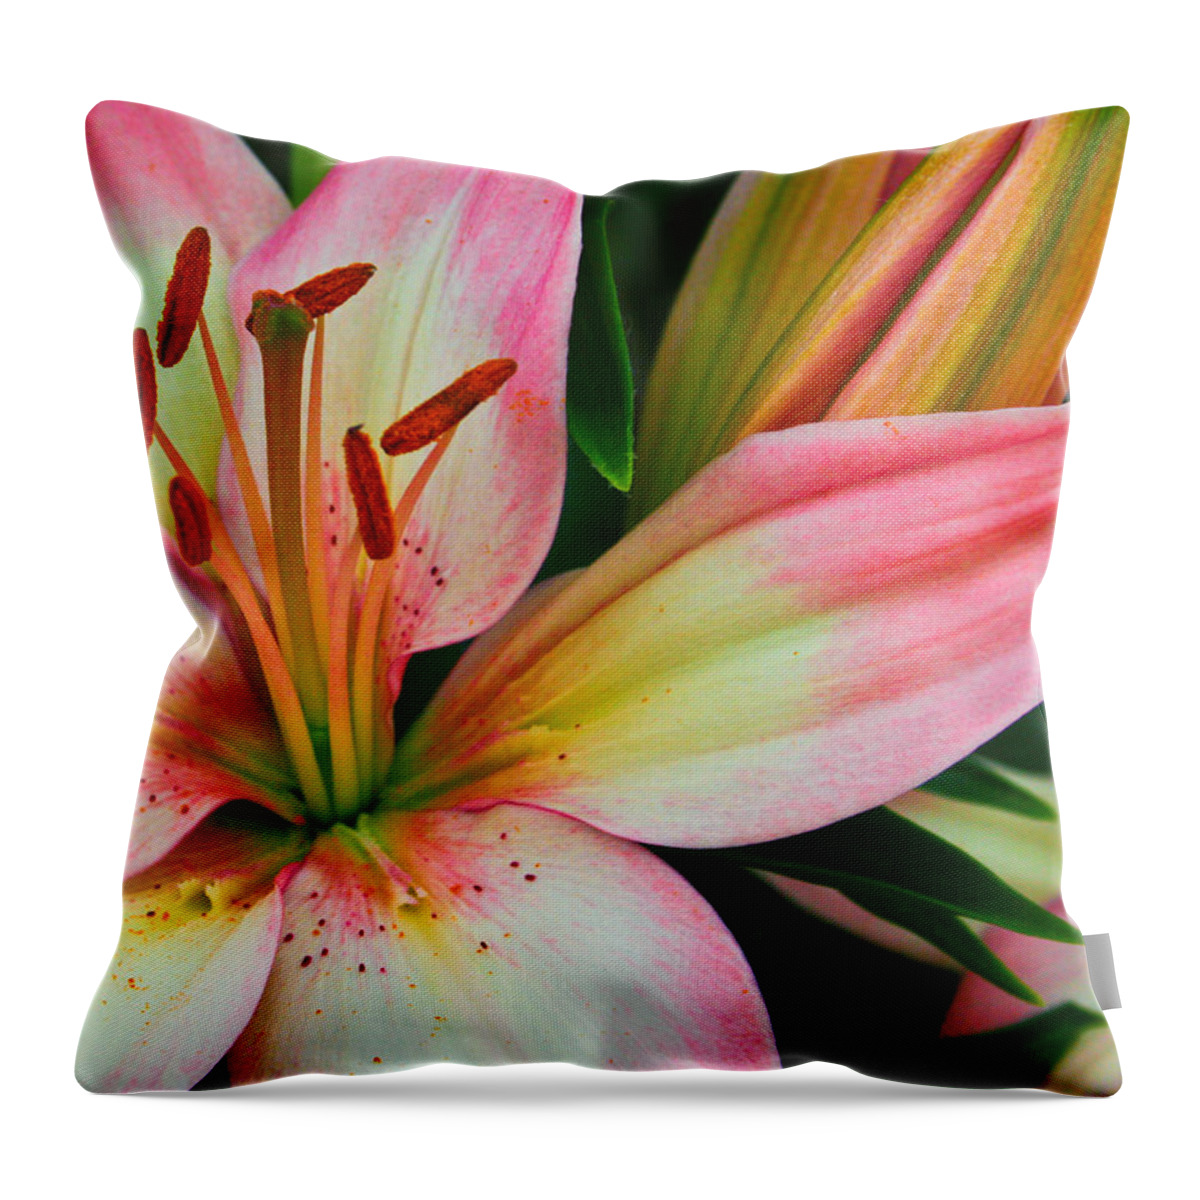 Floral Throw Pillow featuring the photograph Pastel Pretty by Lynne Jenkins